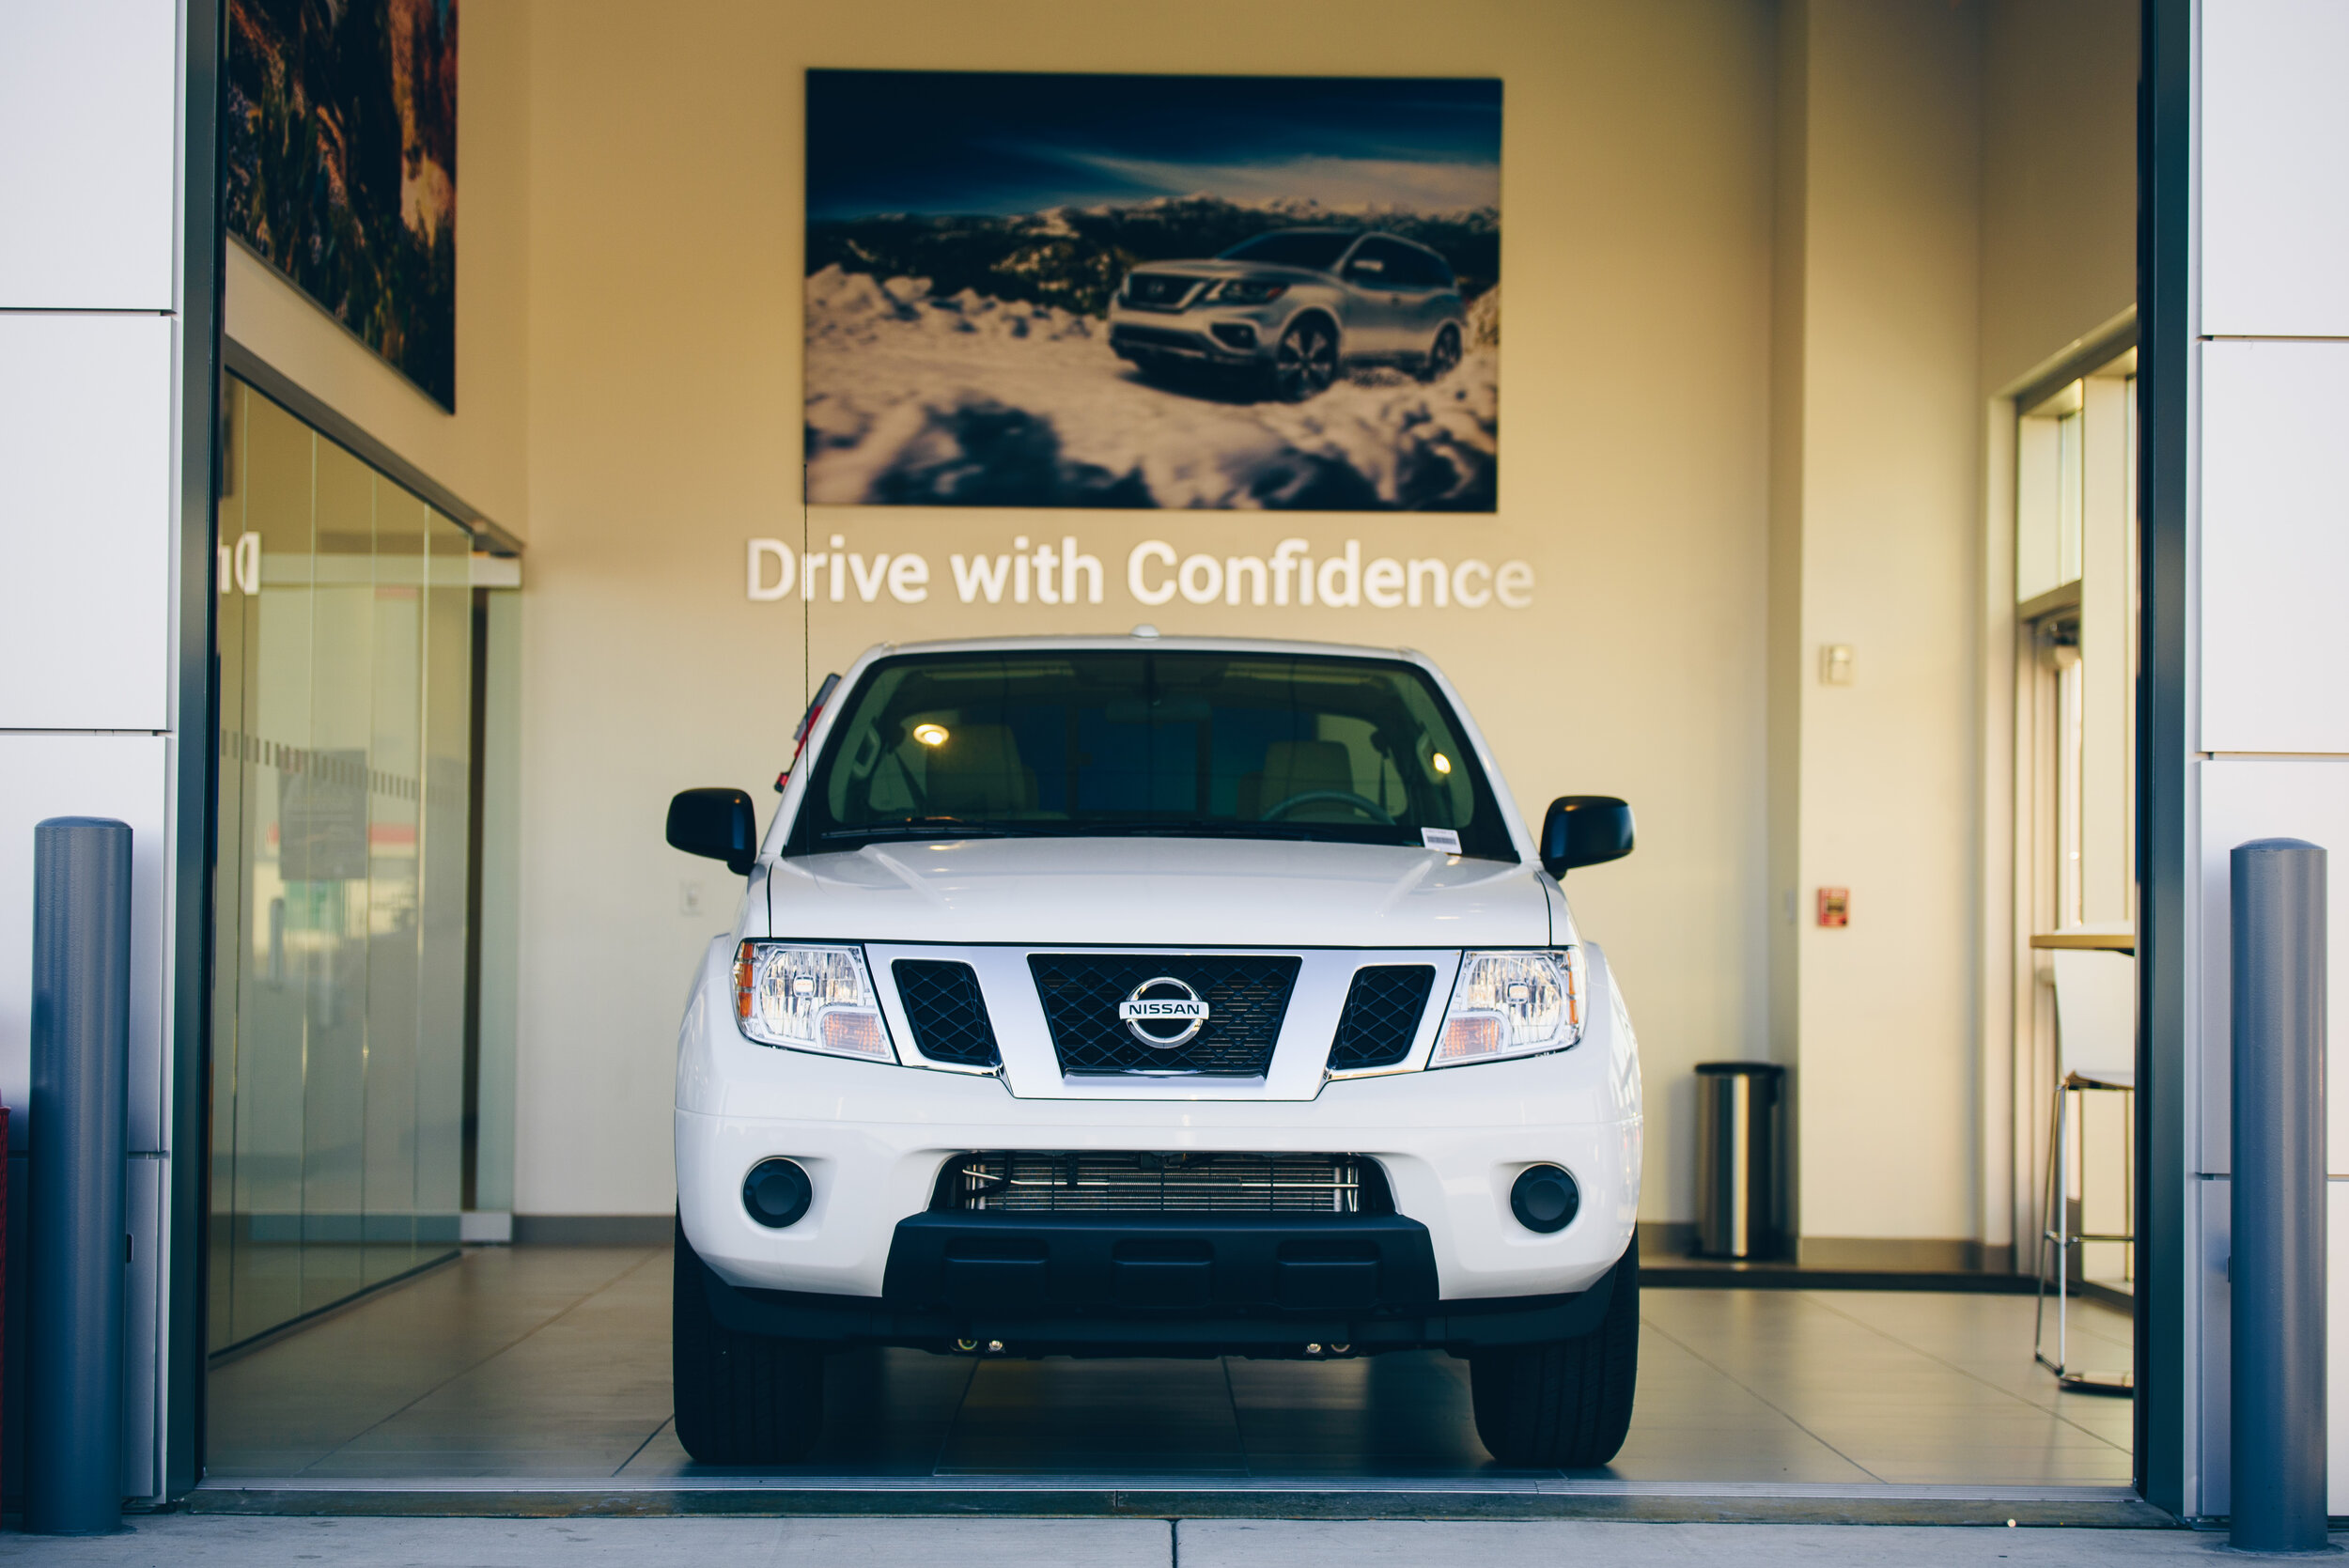  The Drive with Confidence bay is a major feature of the new dealership they were quite proud of. The door to this bad boy opens in, no joke, about 4 seconds. Built for getting customers appraisals on their current cars &amp; letting them avoiding th